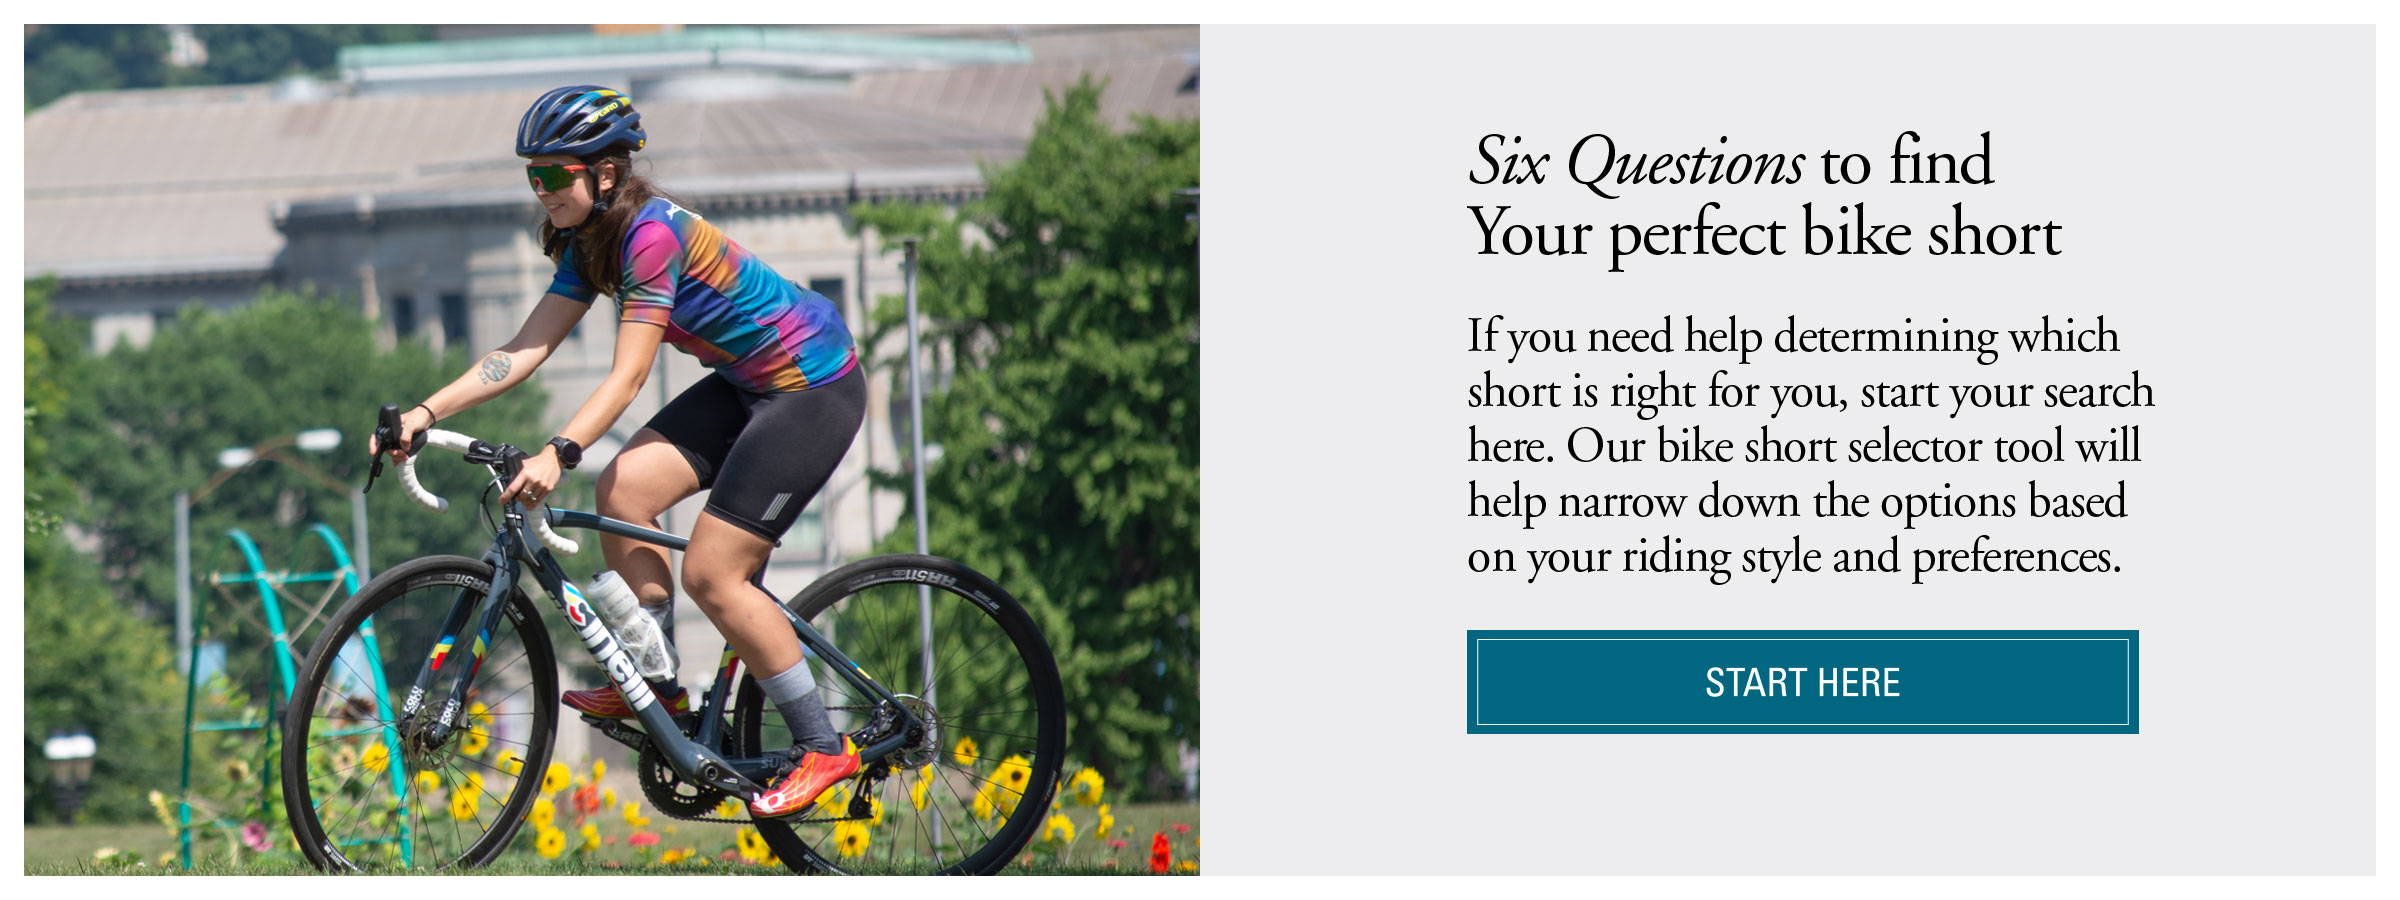 Bike Short Selector Tool - 6 Questions to find your perfect bike short